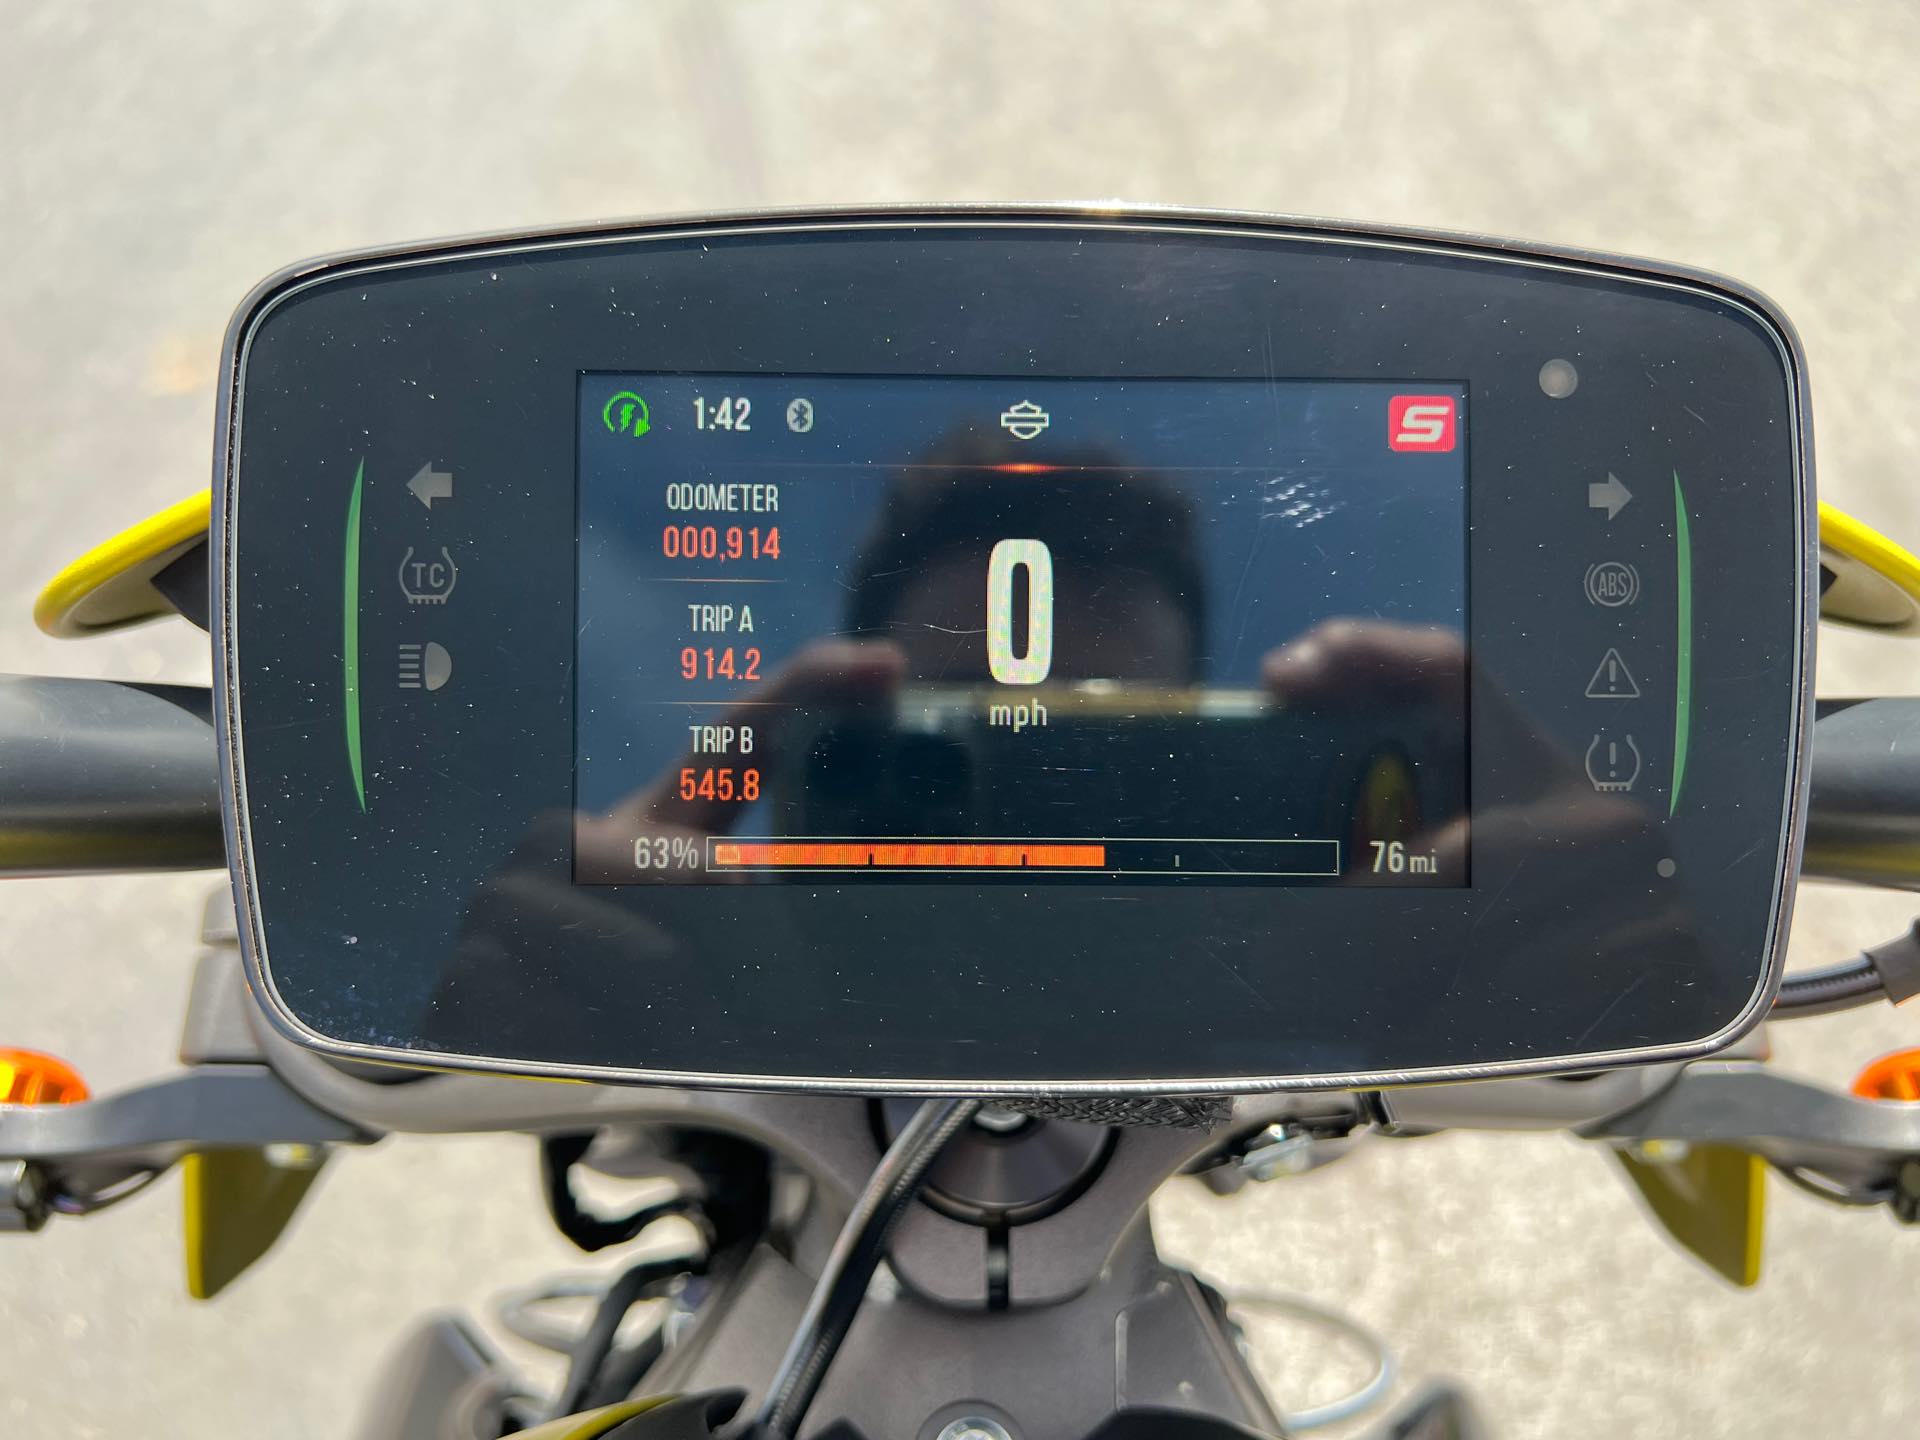 2020 Harley-Davidson Electric LiveWire at Aces Motorcycles - Fort Collins